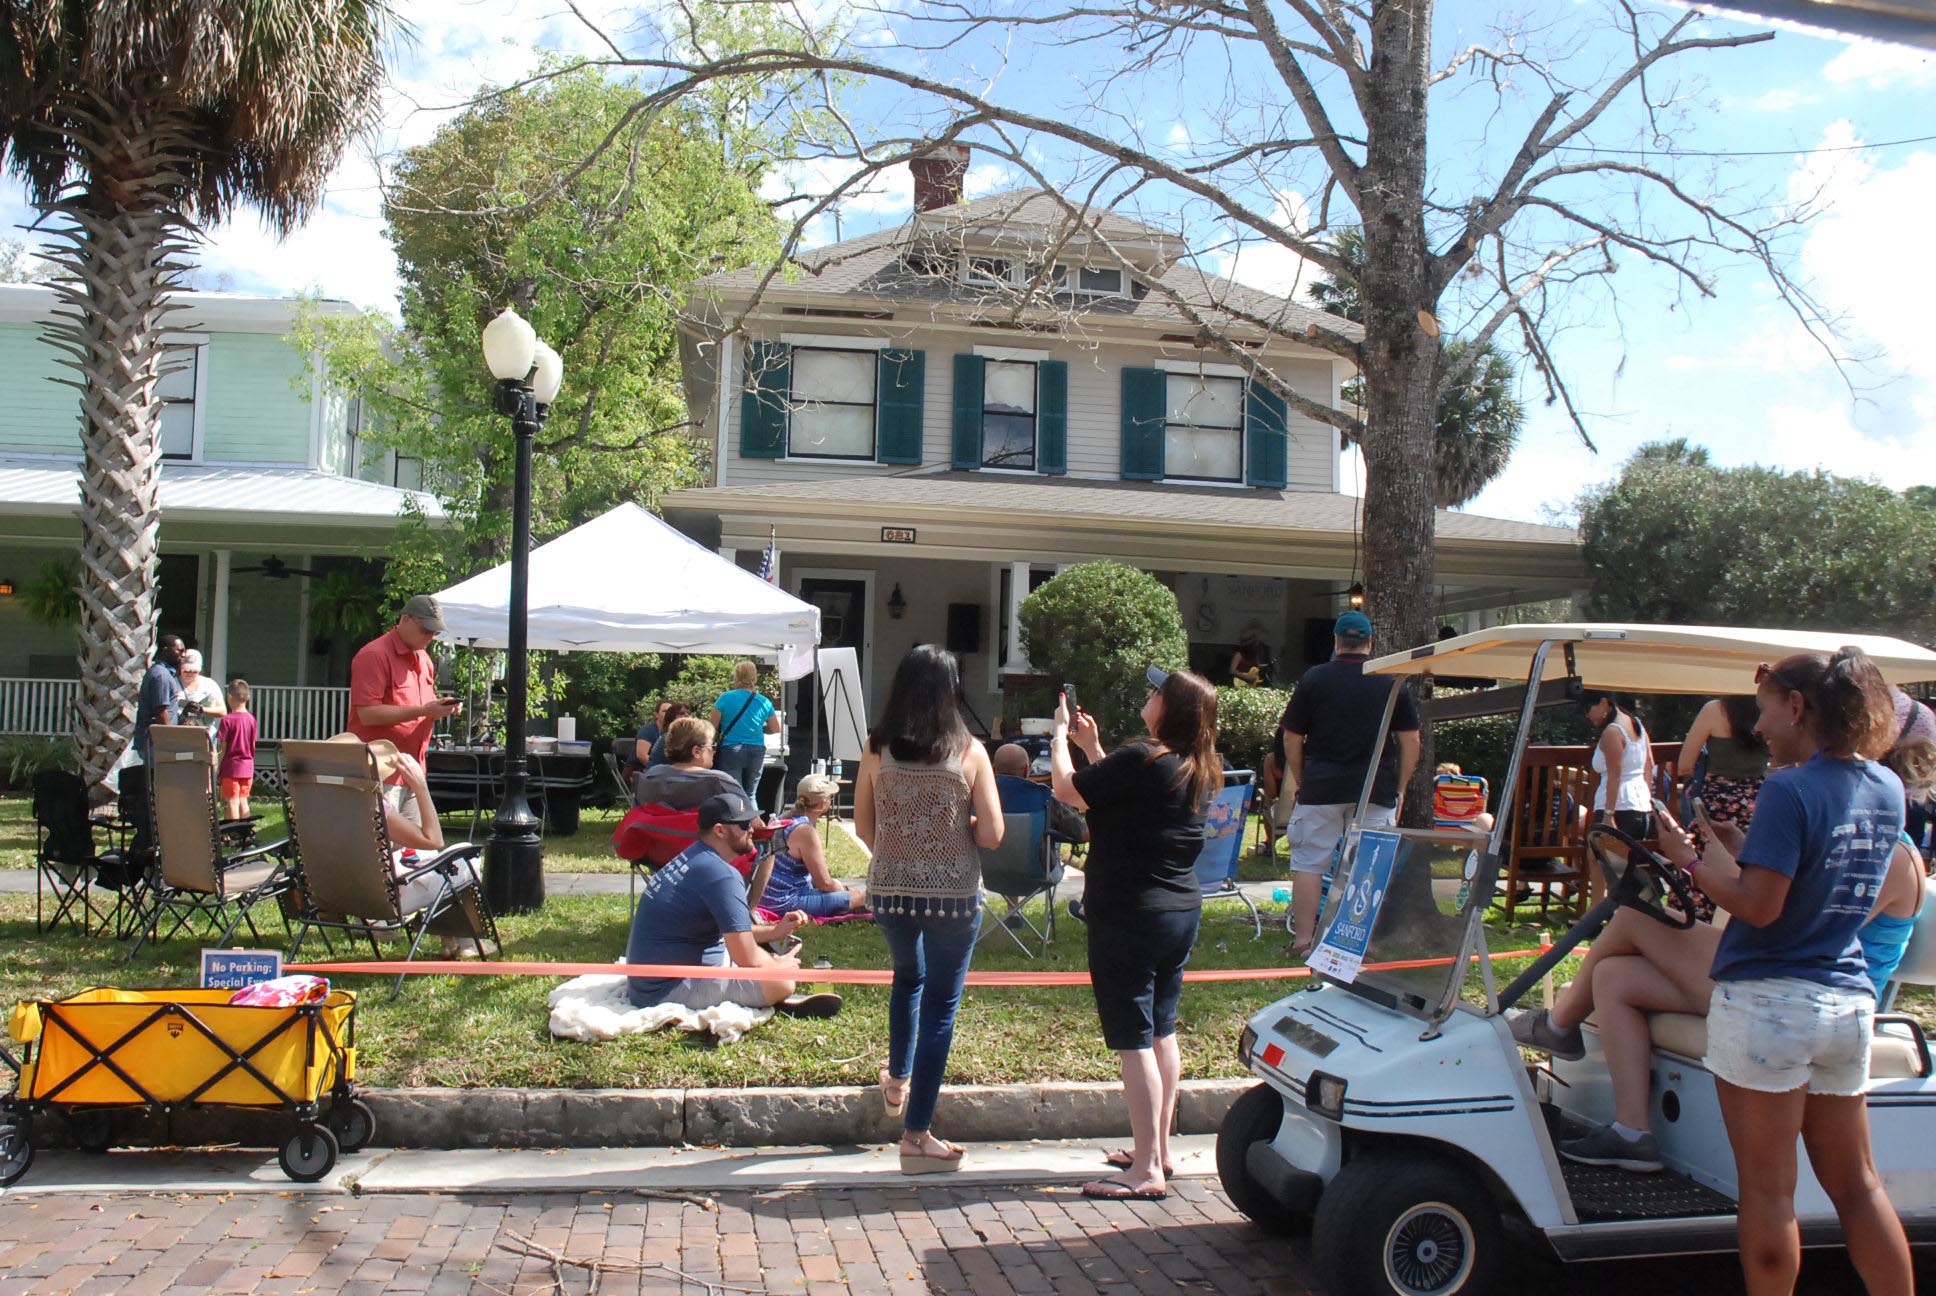 Porchfest returns this weekend to Sanford’s Historic District with 50